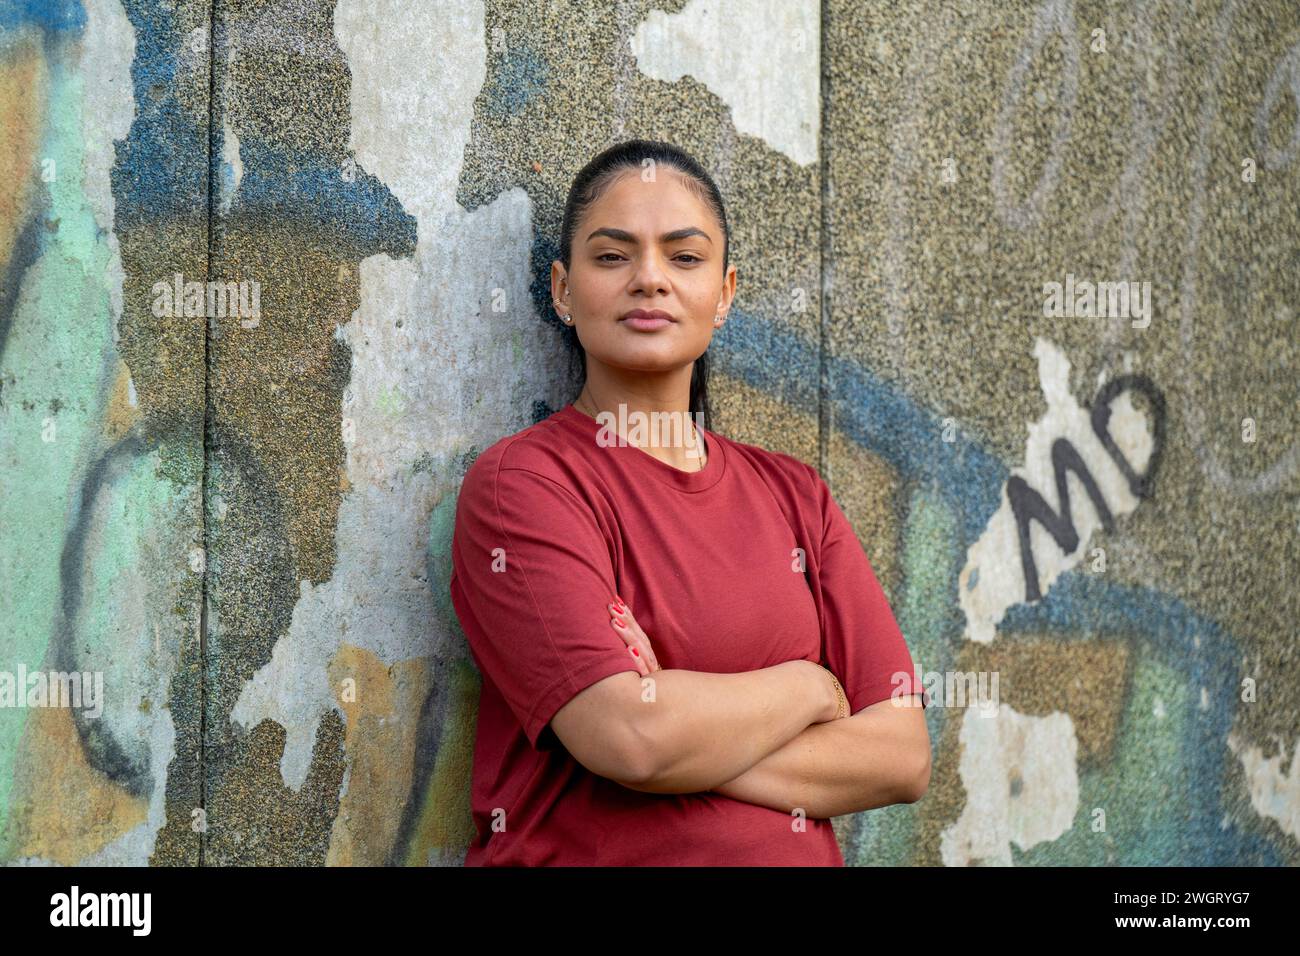 Portrait of a healthy woman leaning on a wall Stock Photo